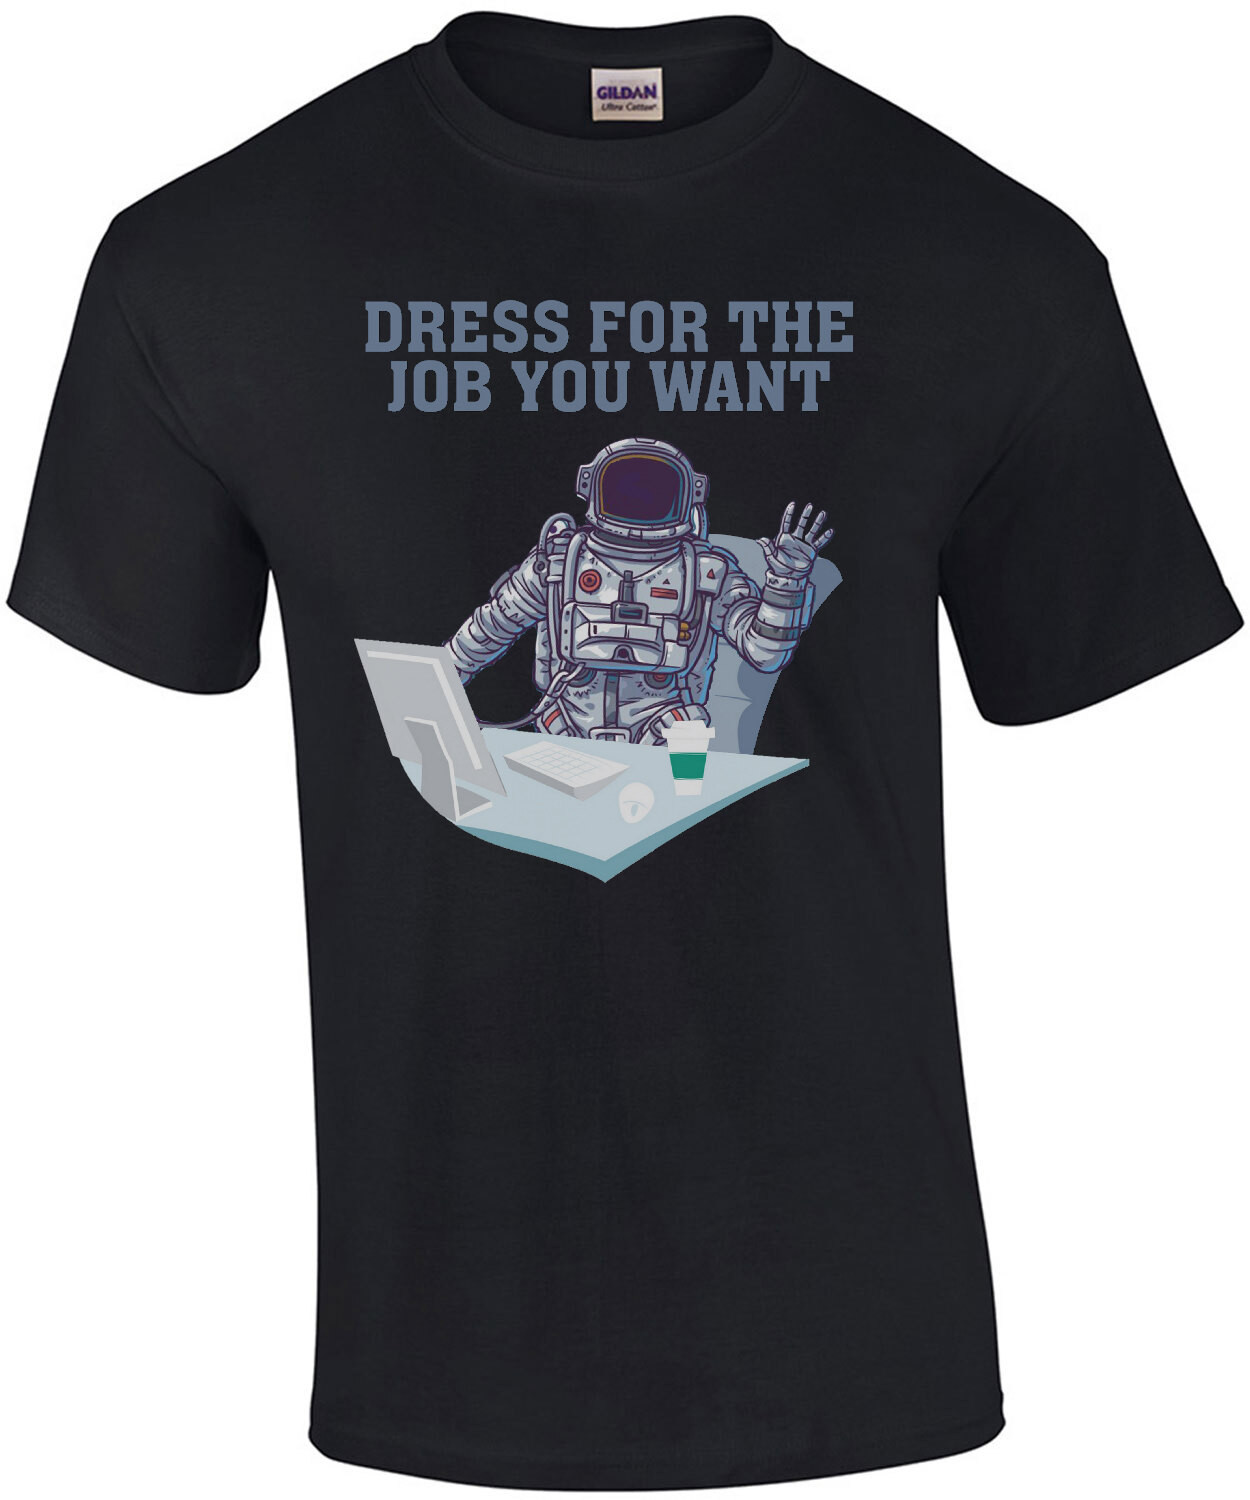 Dress for the job you want - funny office humor t-shirt